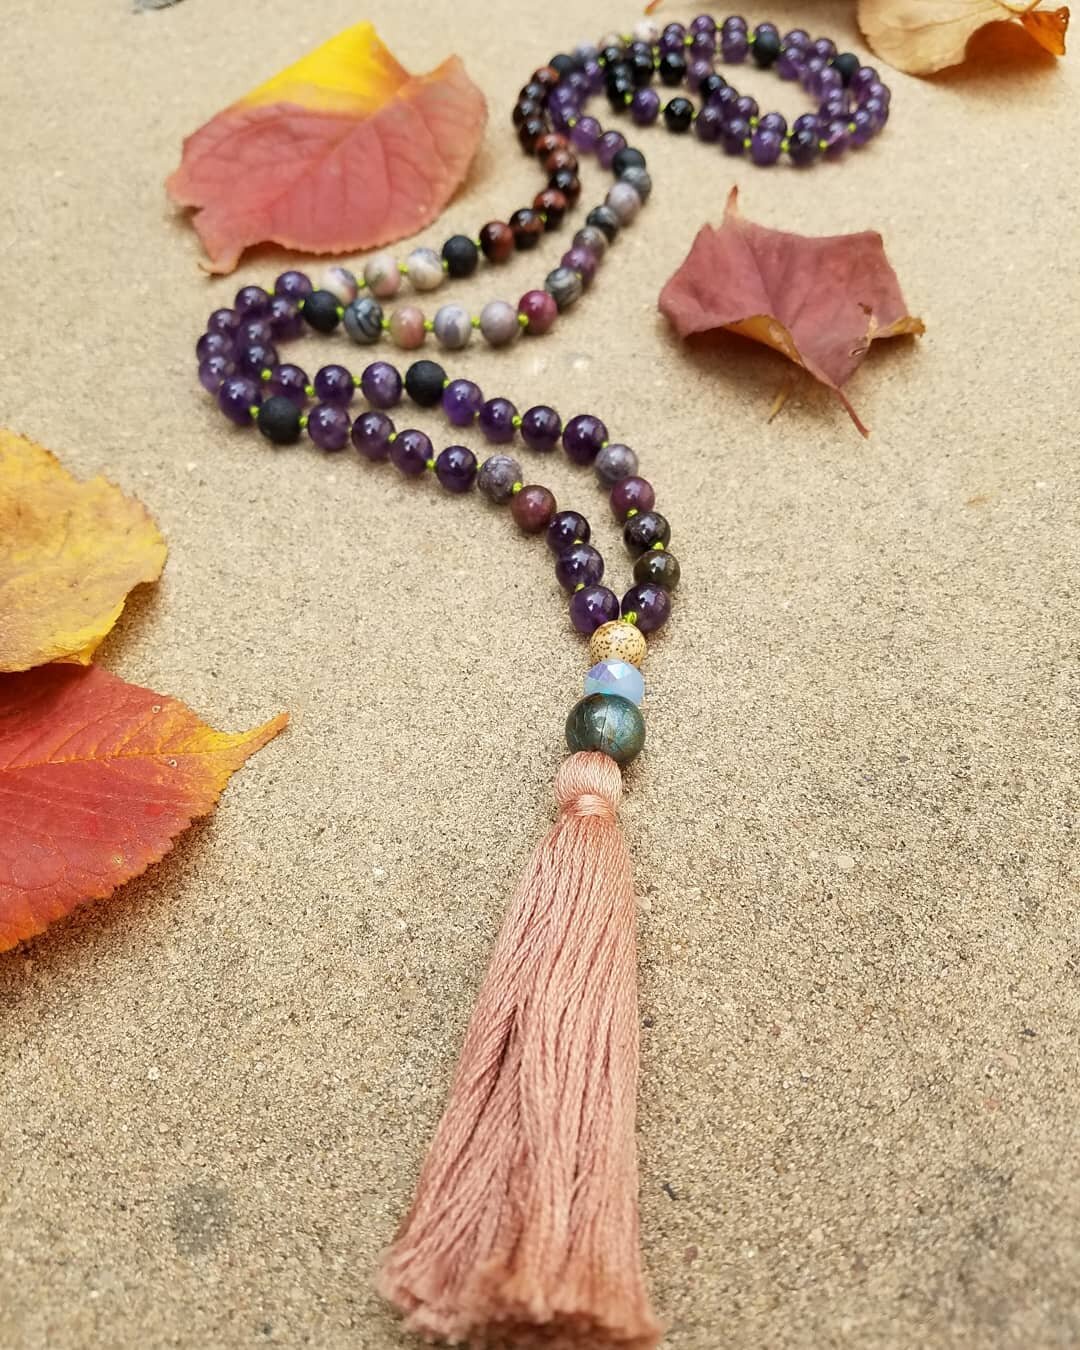 Fall is definitely in the air and the Intergalactic Moon mala couldn't be more perfect for the full Harvest moon coming this Thursday. Swoon!⁠
⁠
The Intergalactic Moon mala is a powerful blend of tourmaline, red tigers eye, lava, amethyst and ⁠mookai